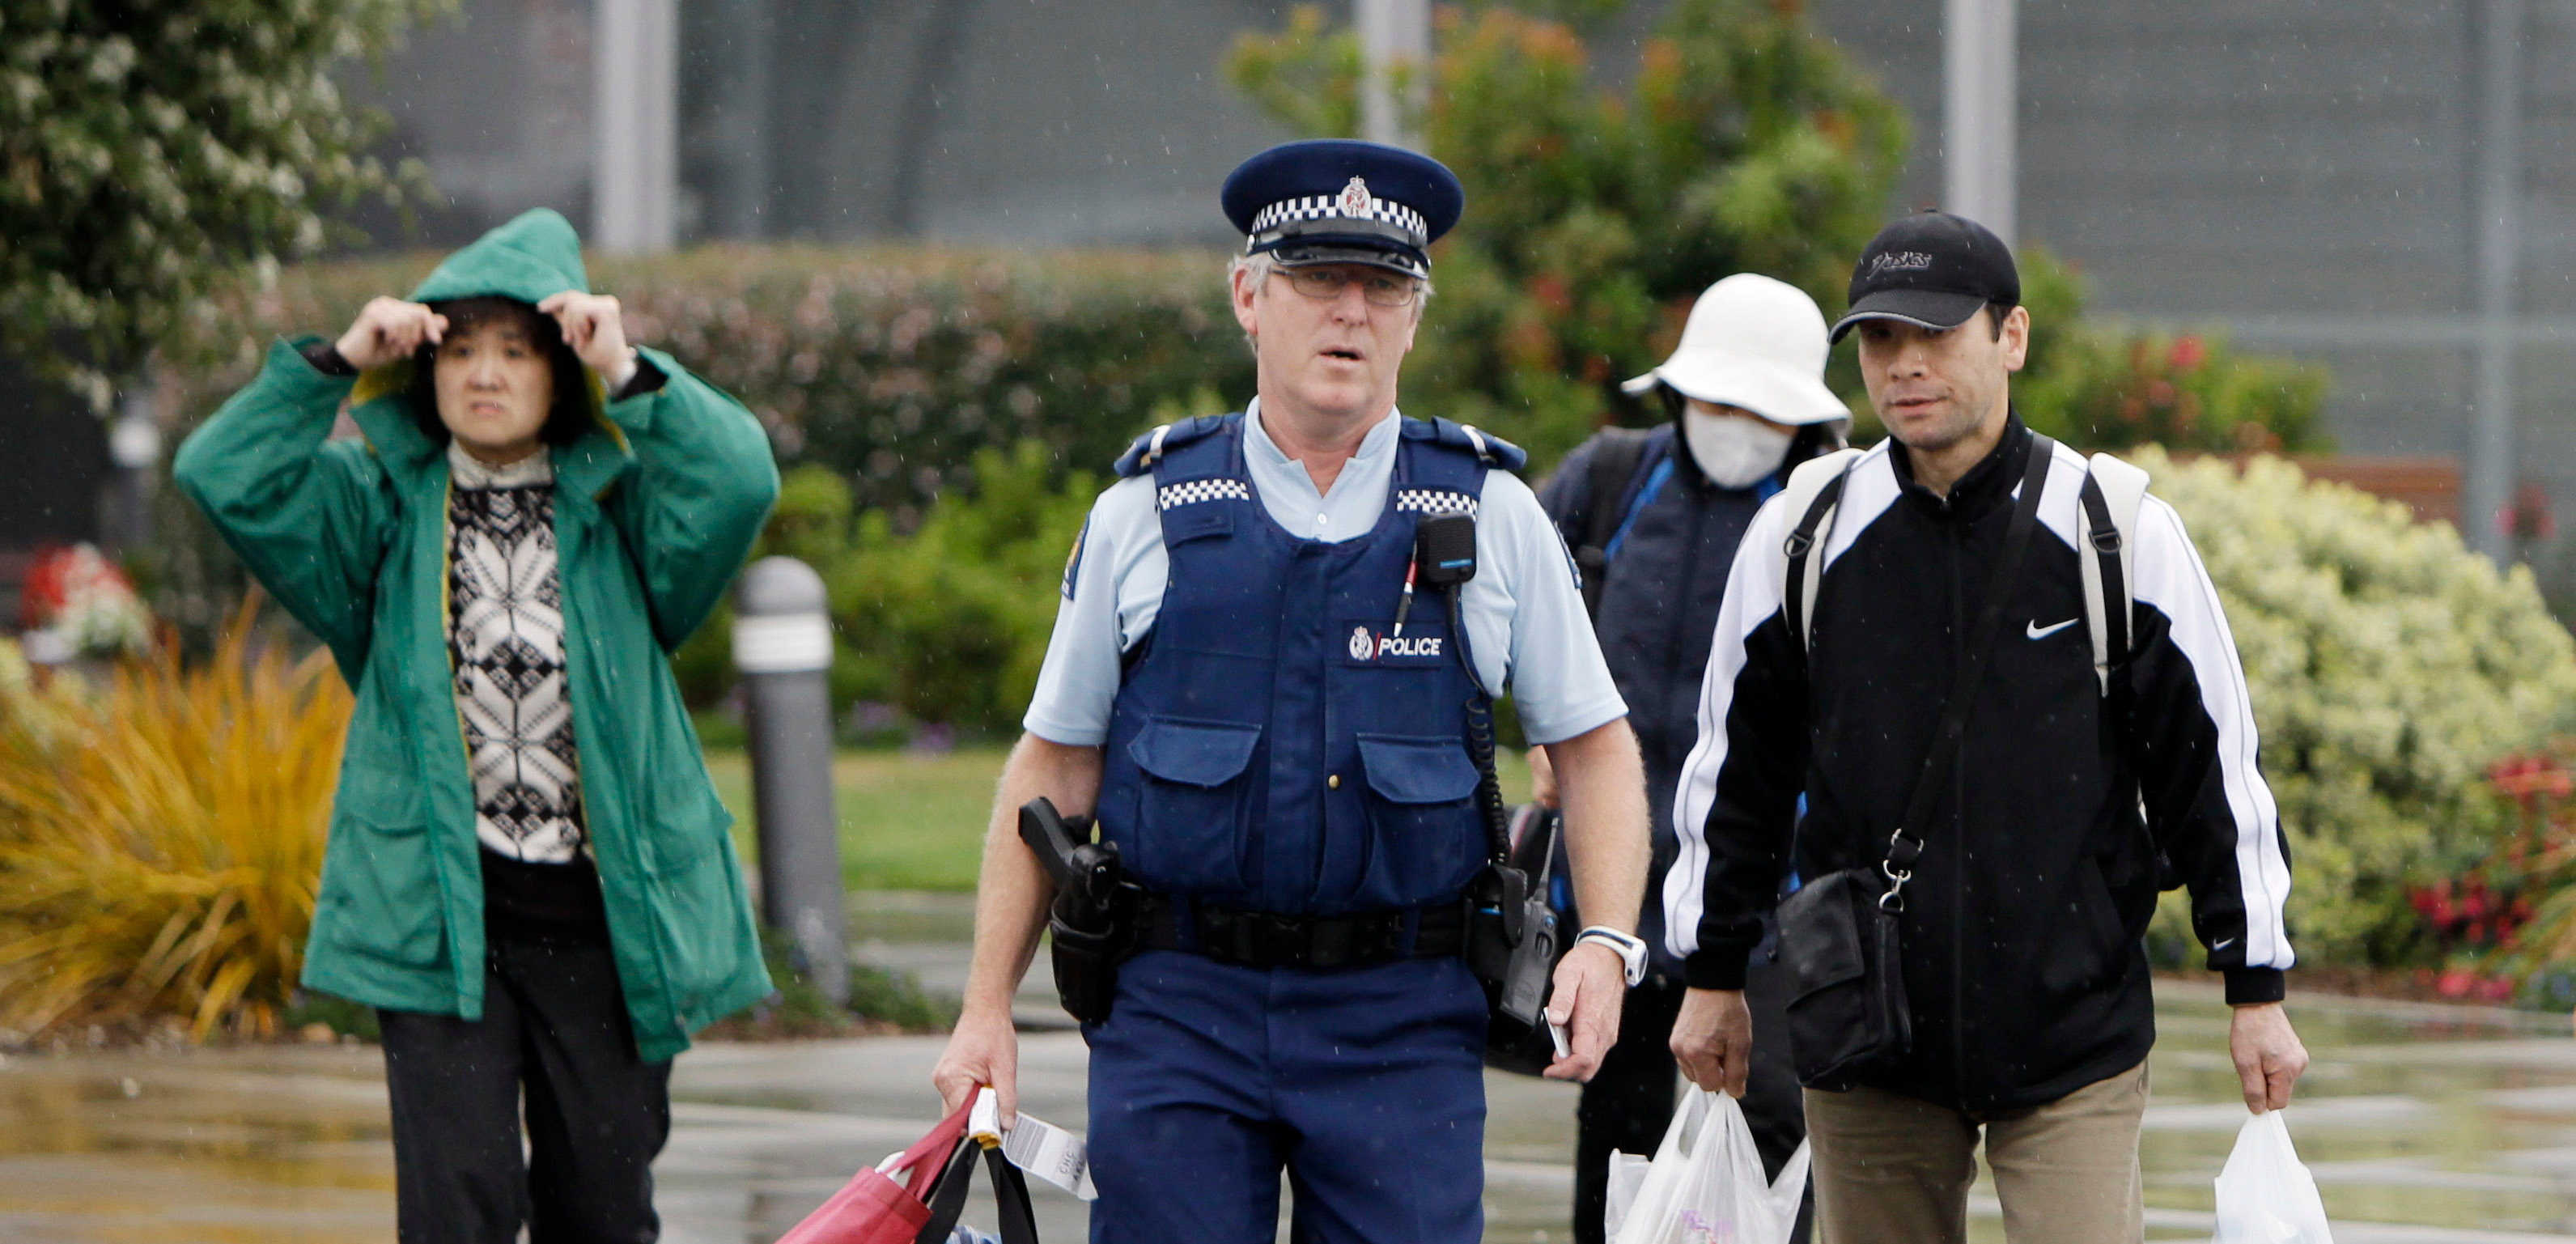 New Zealand: Police and University of Waikato join forces on crime research